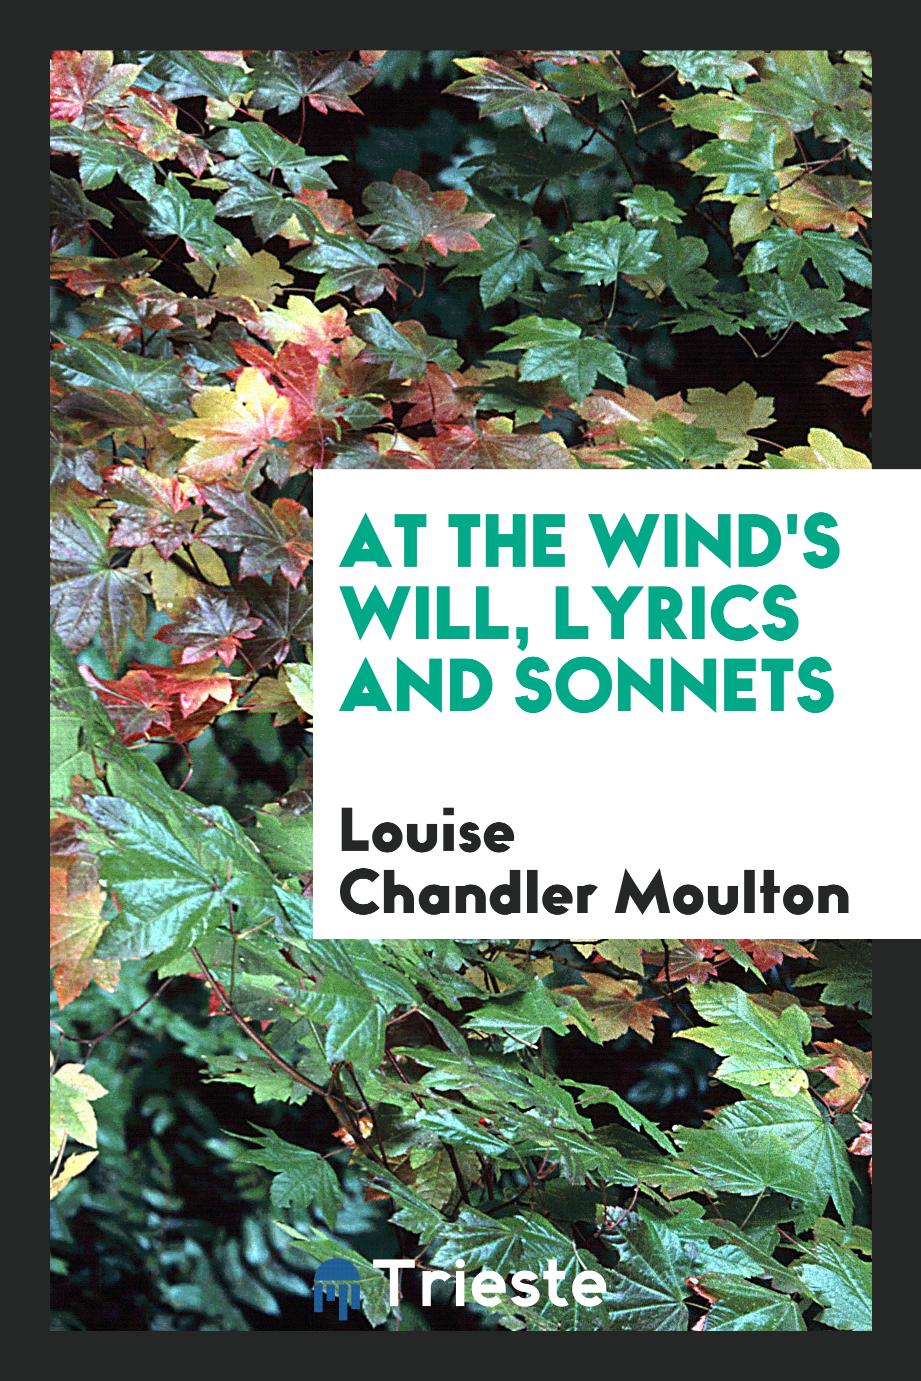 At the wind's will, lyrics and sonnets